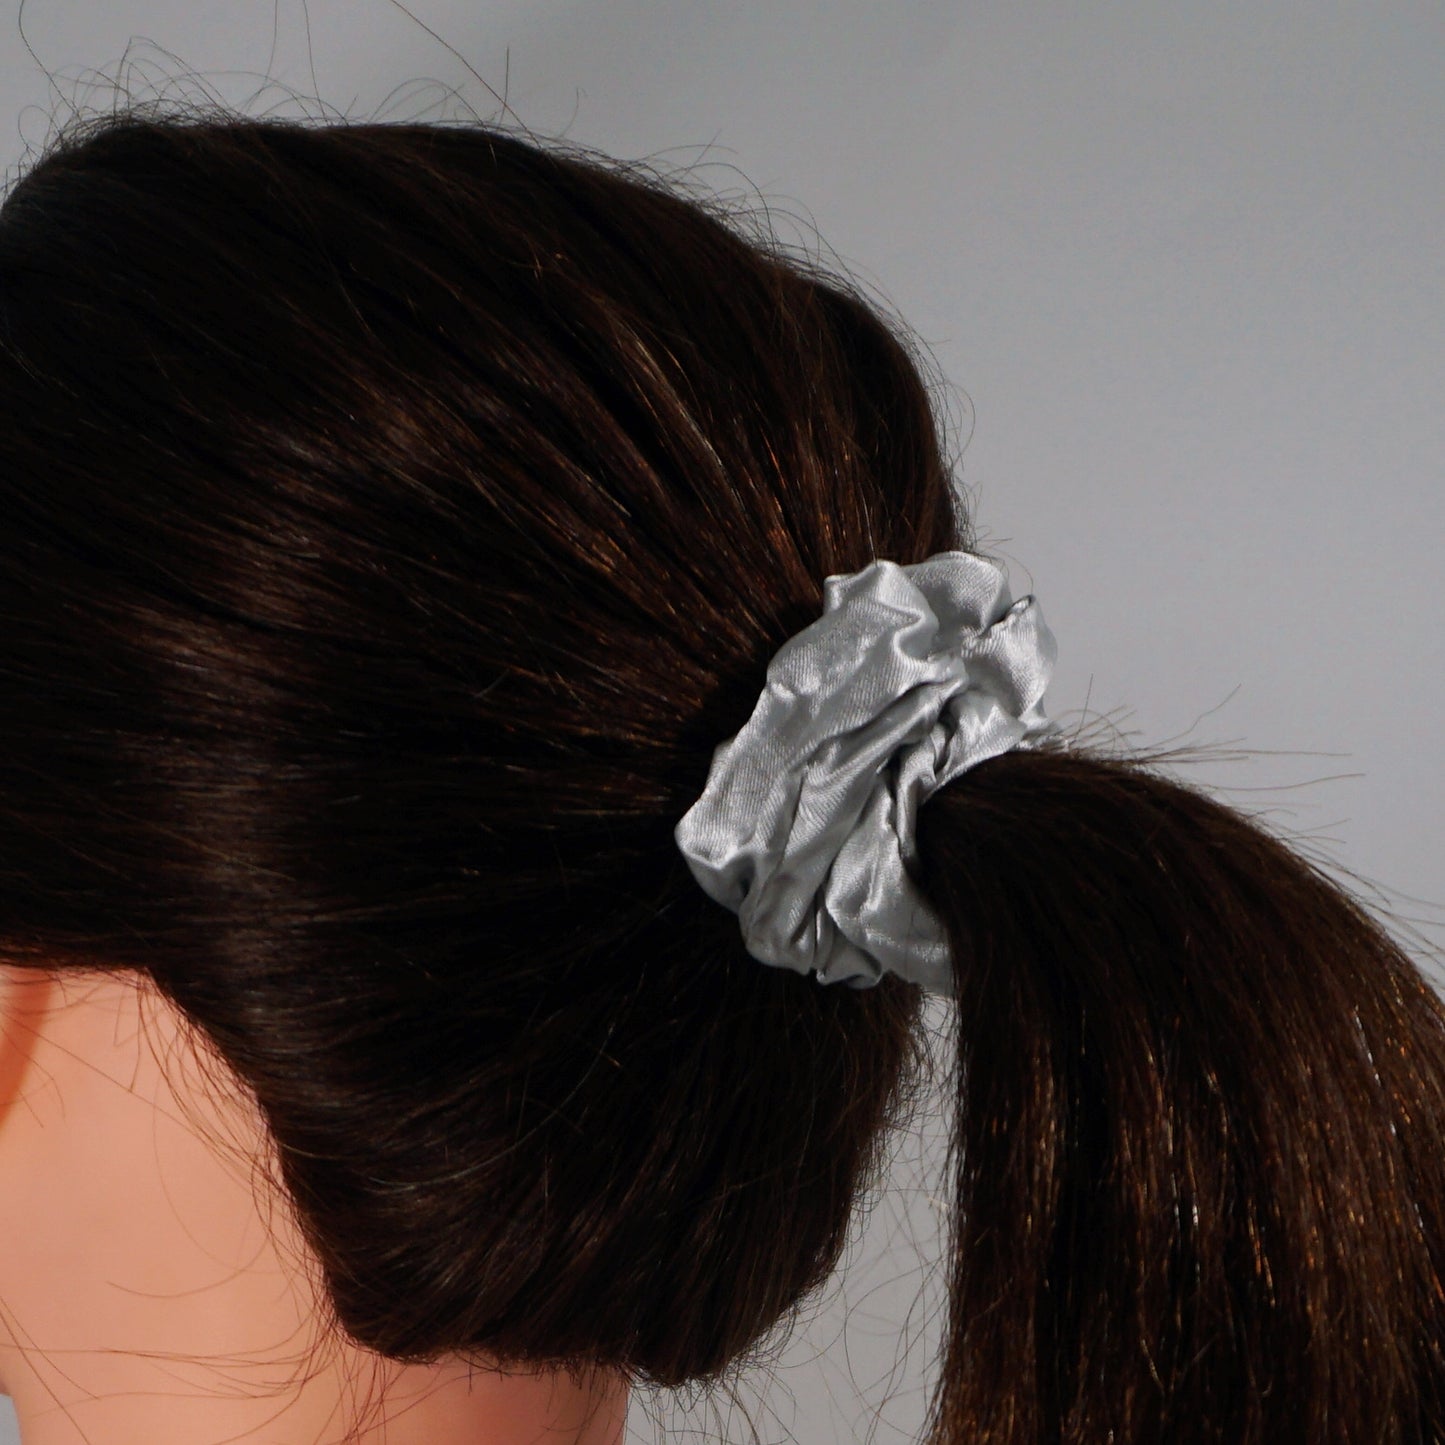 Amelia Beauty Products, Gray Satin Scrunchies, 3.5in Diameter, Gentle on Hair, Strong Hold, No Snag, No Dents or Creases. 8 Pack